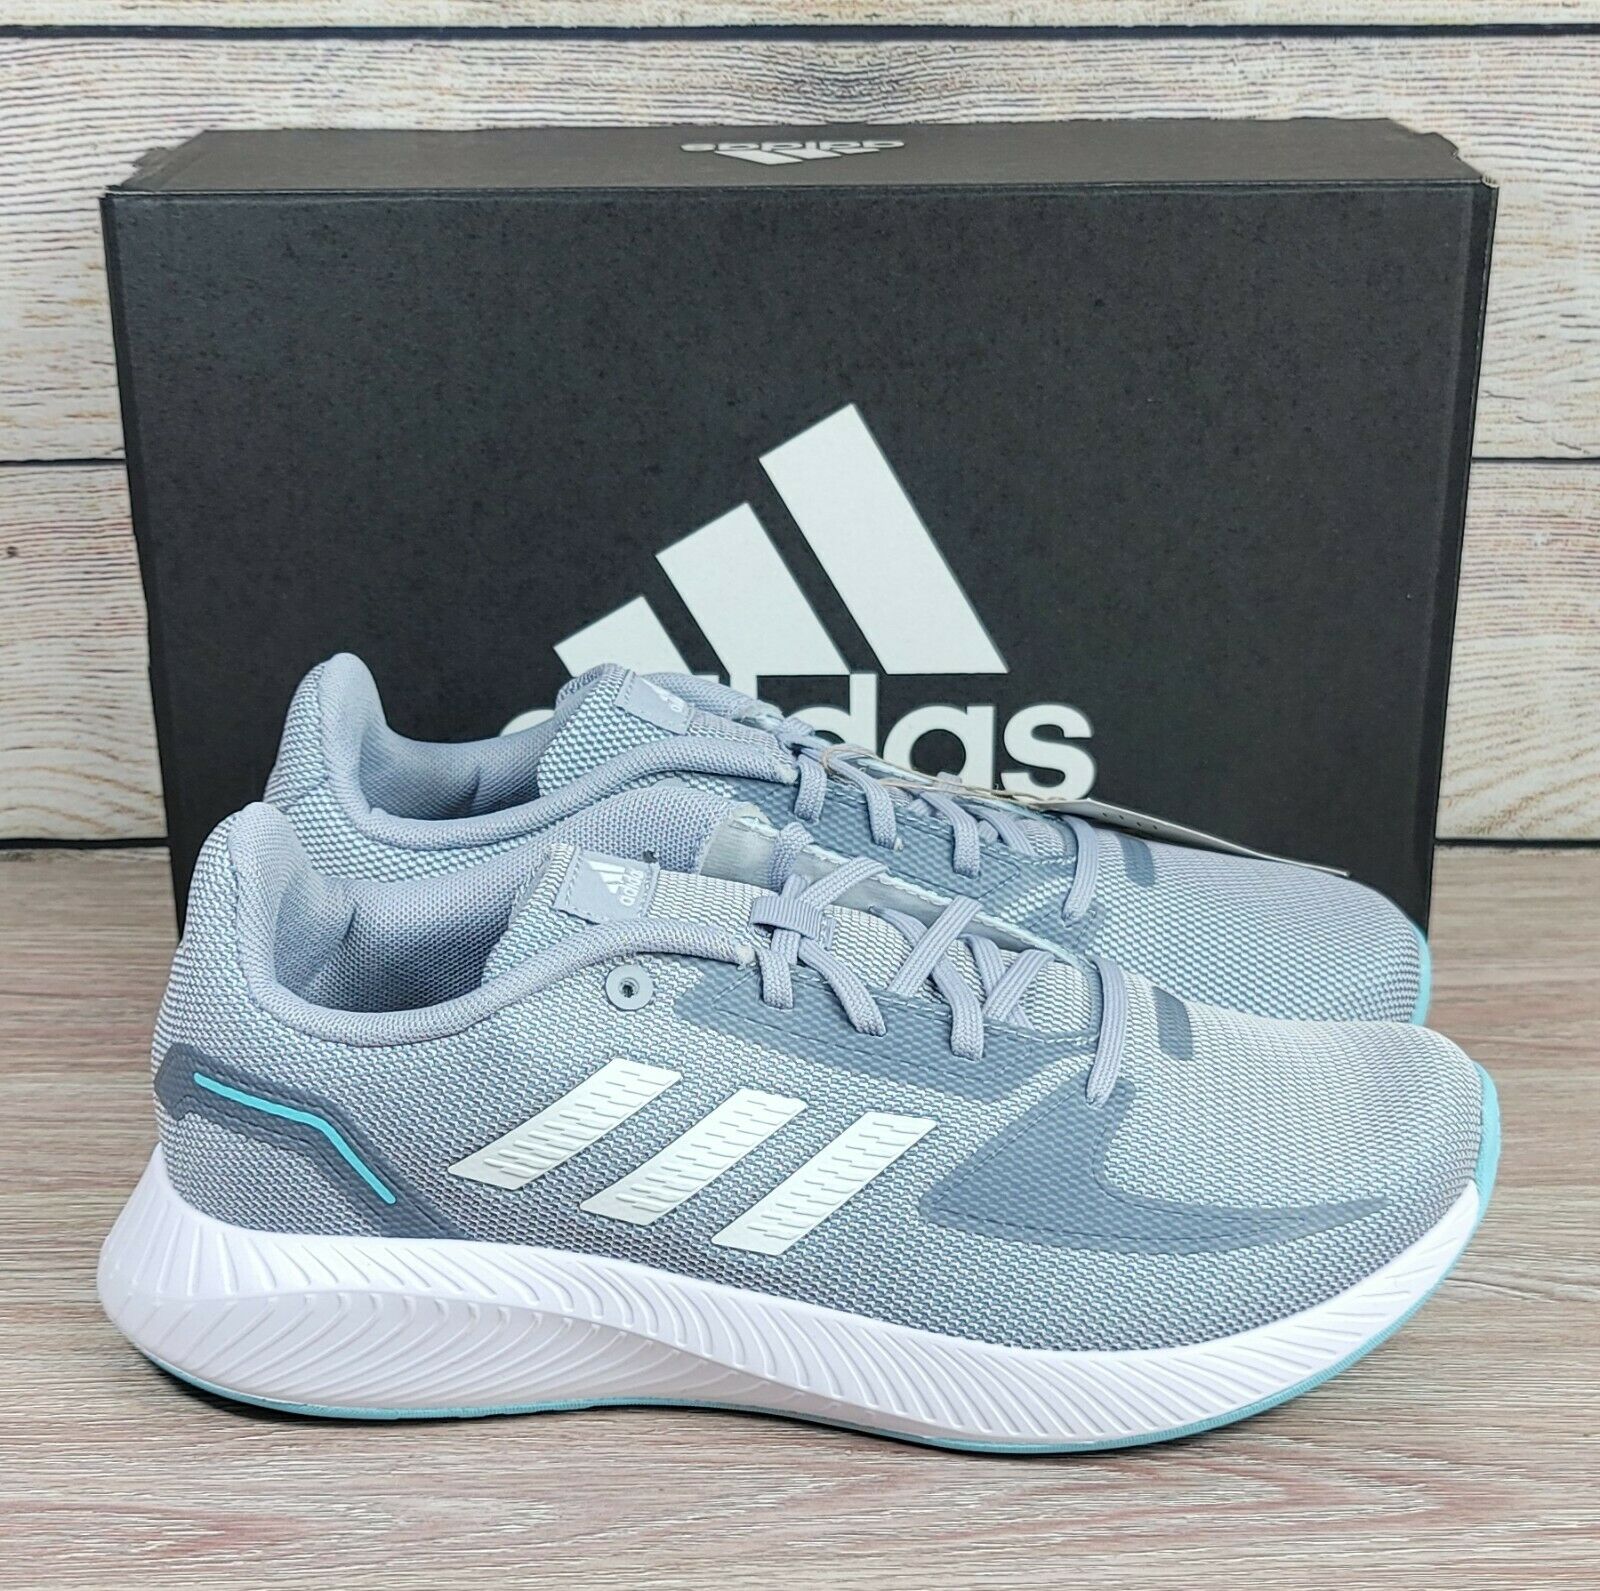 Adidas Women's Running Athletic Training Shoes Size 8.5 Grey/Blue Falcon Workout